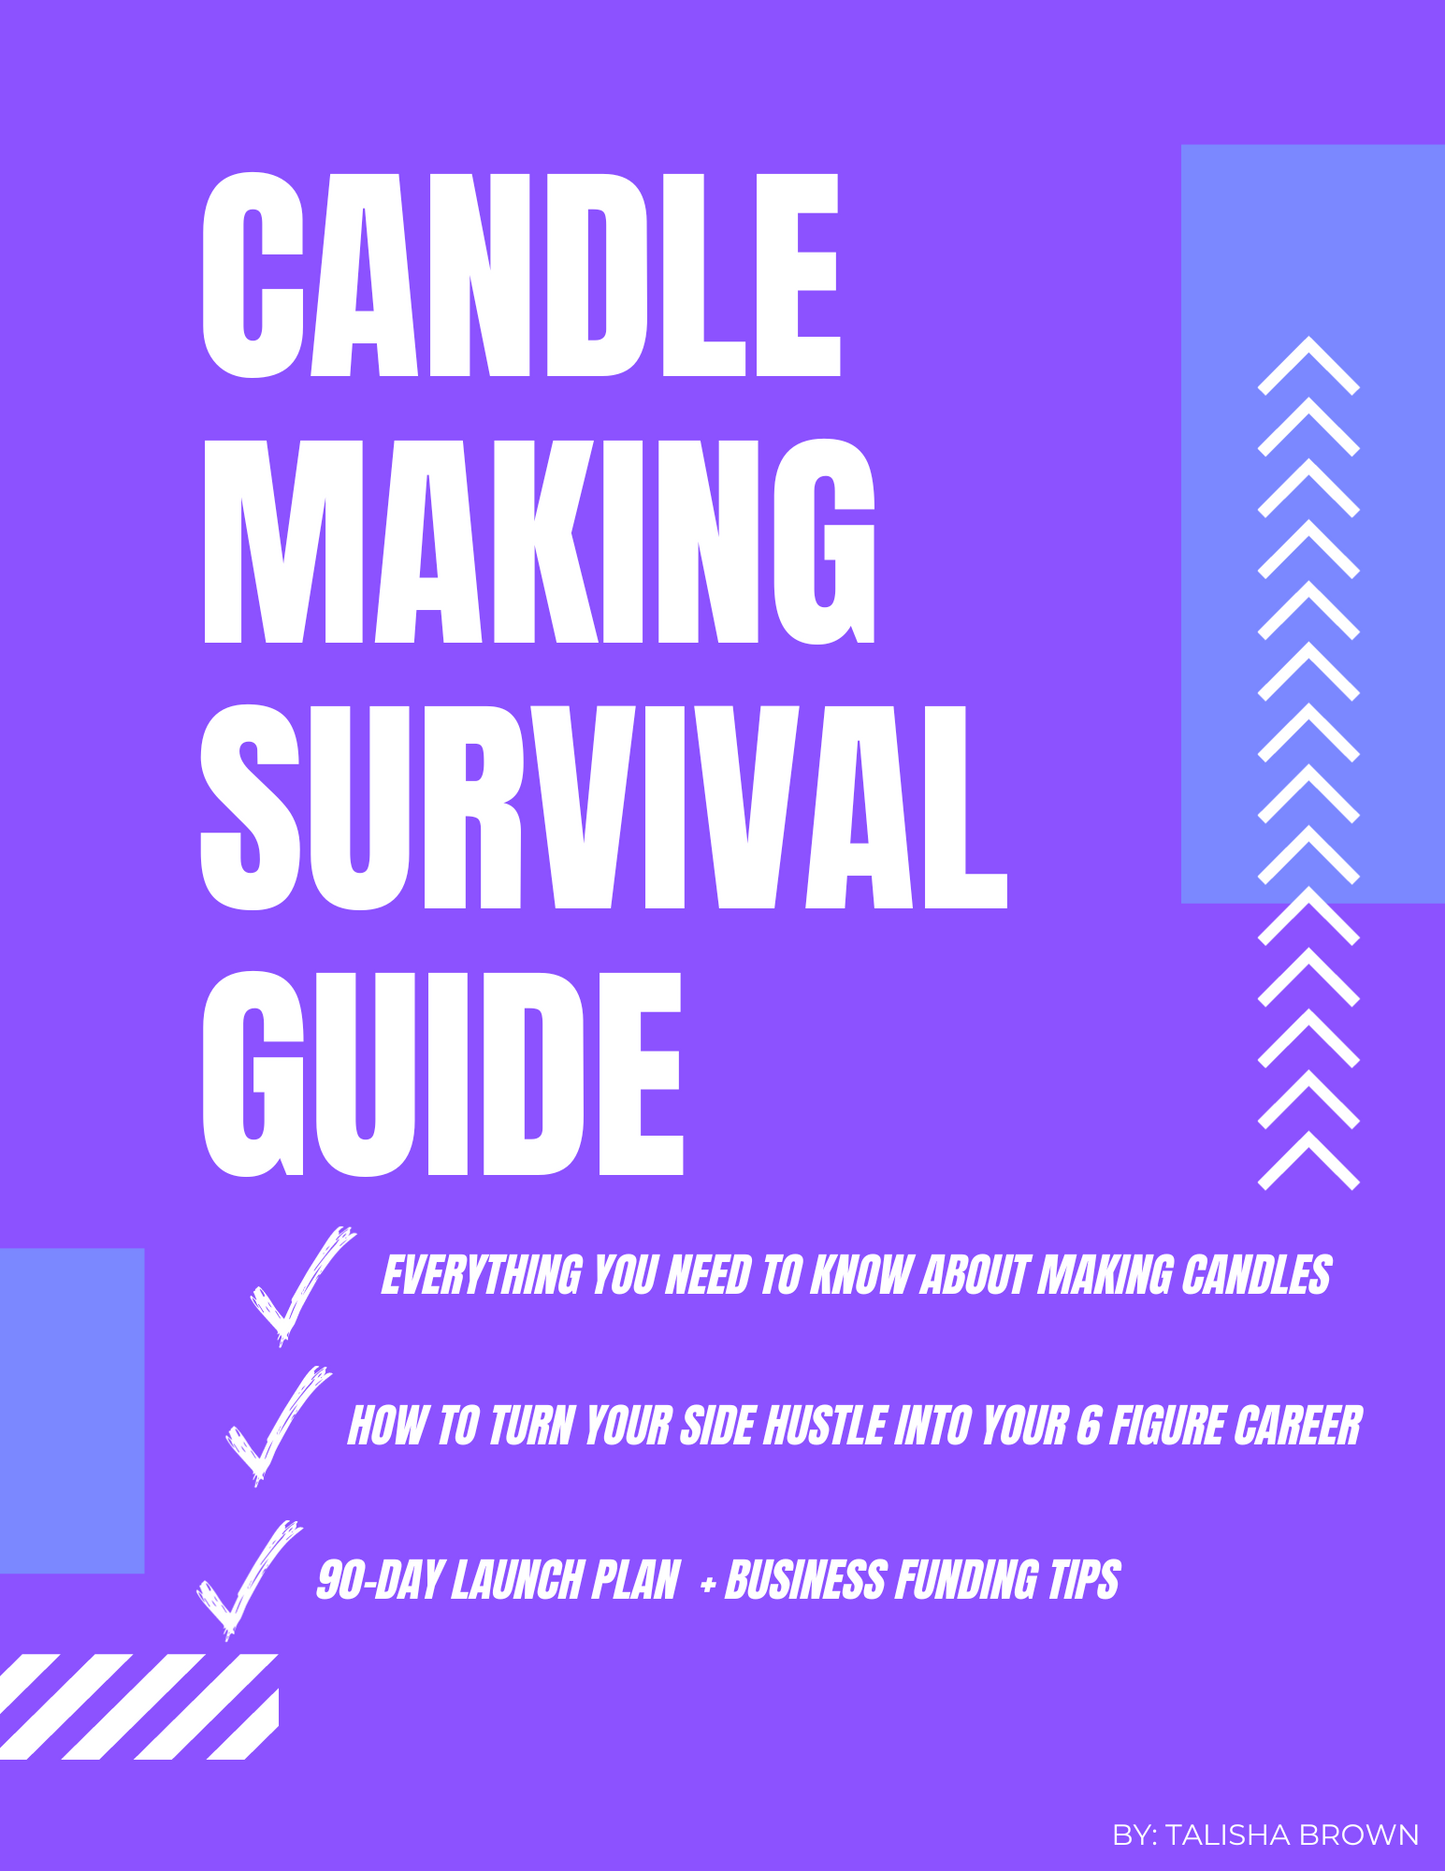 THE ULTIMATE CANDLE MAKING SURVIVAL GUIDE